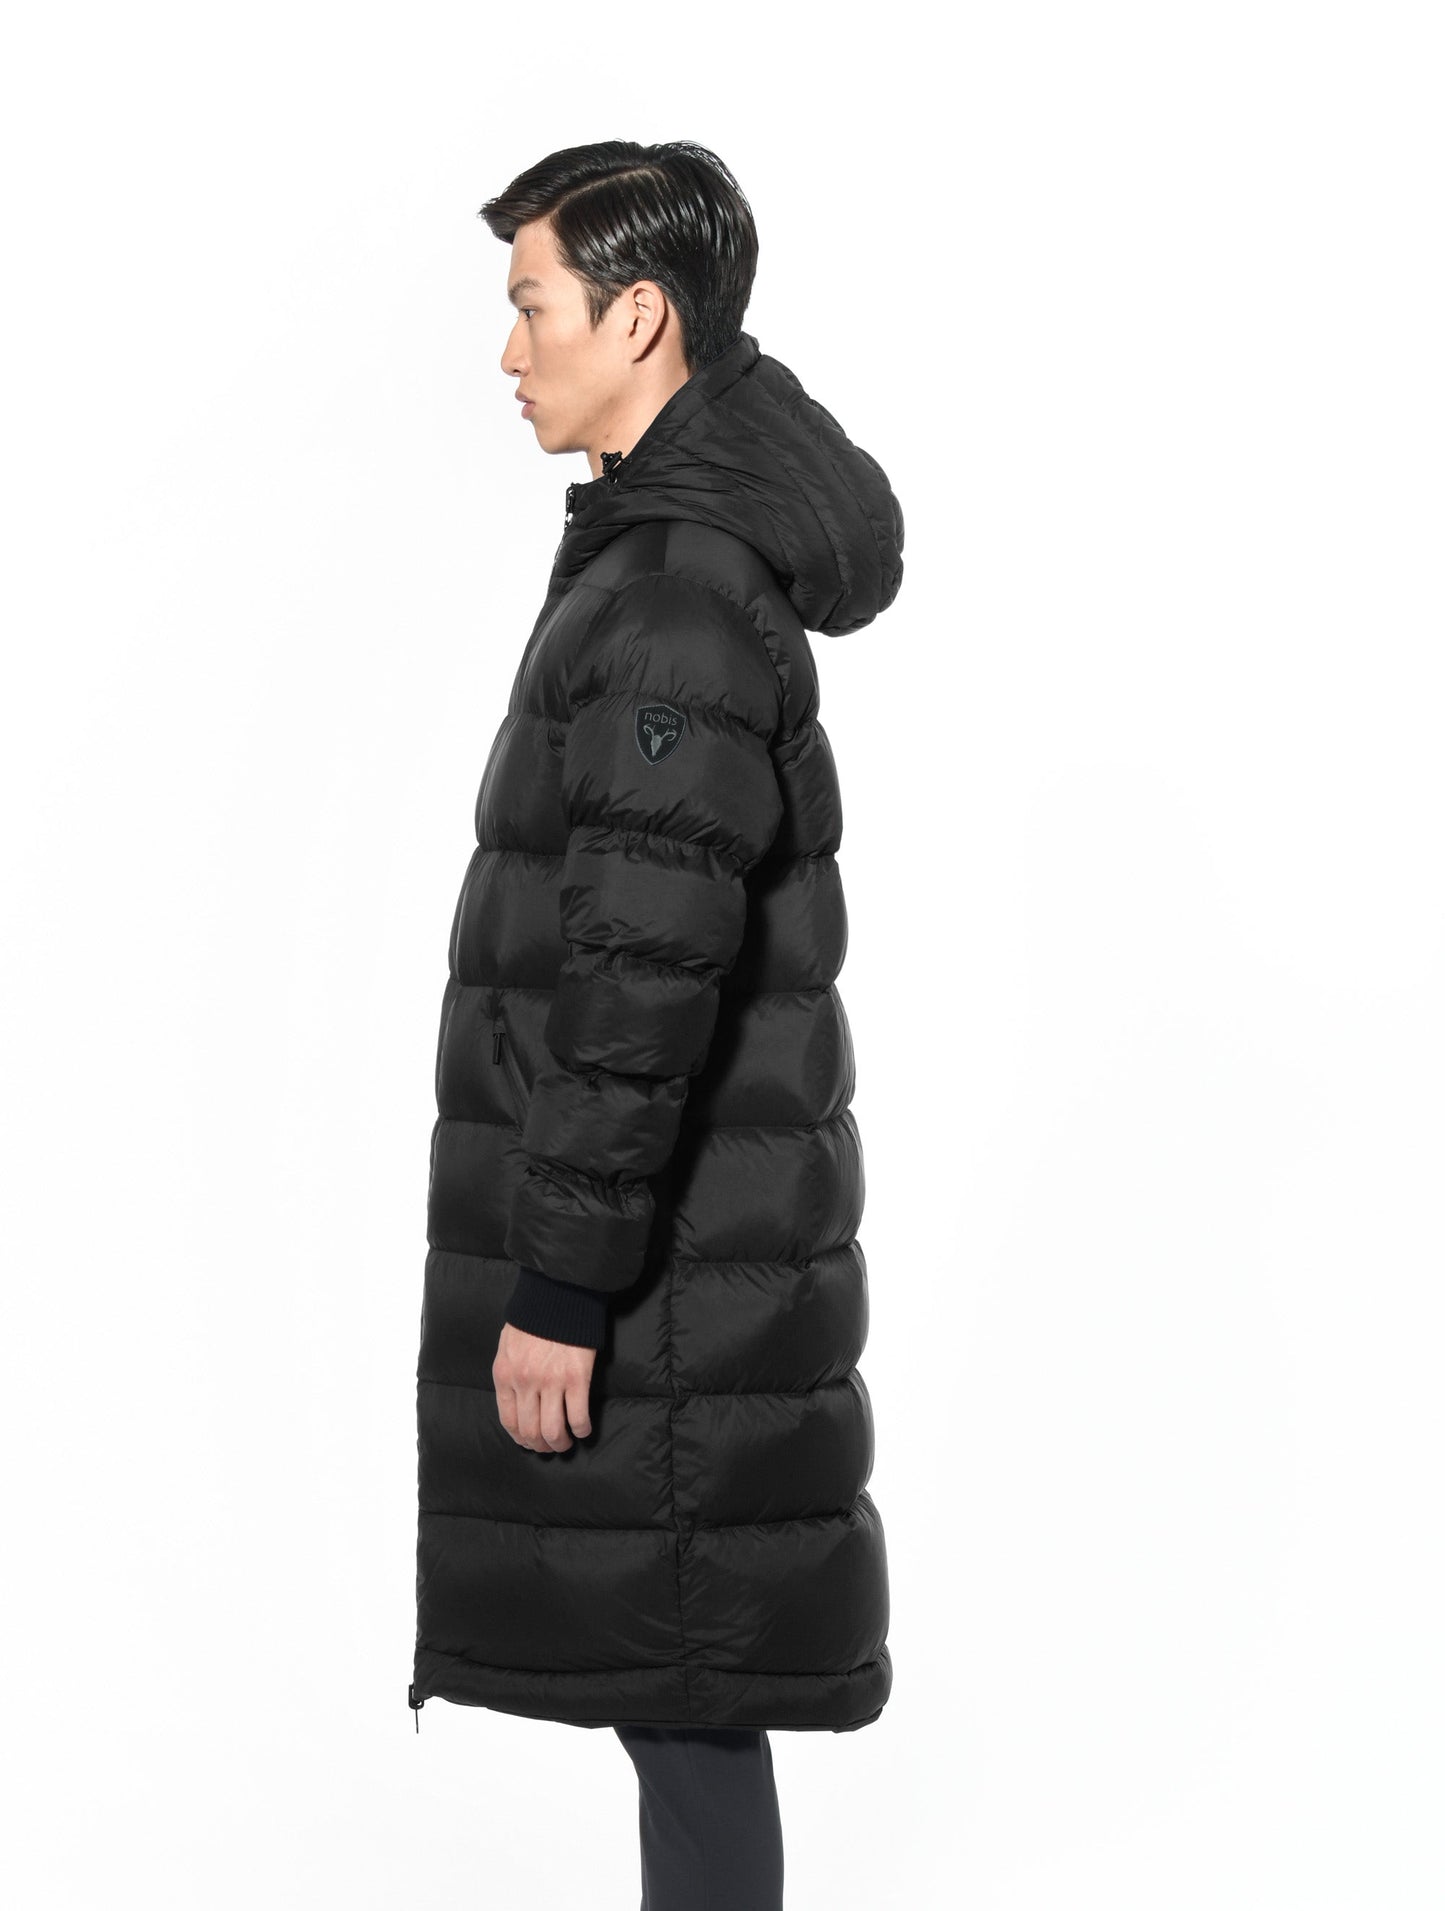 Men's knee length reversible down-filled parka with non-removable hood in Black